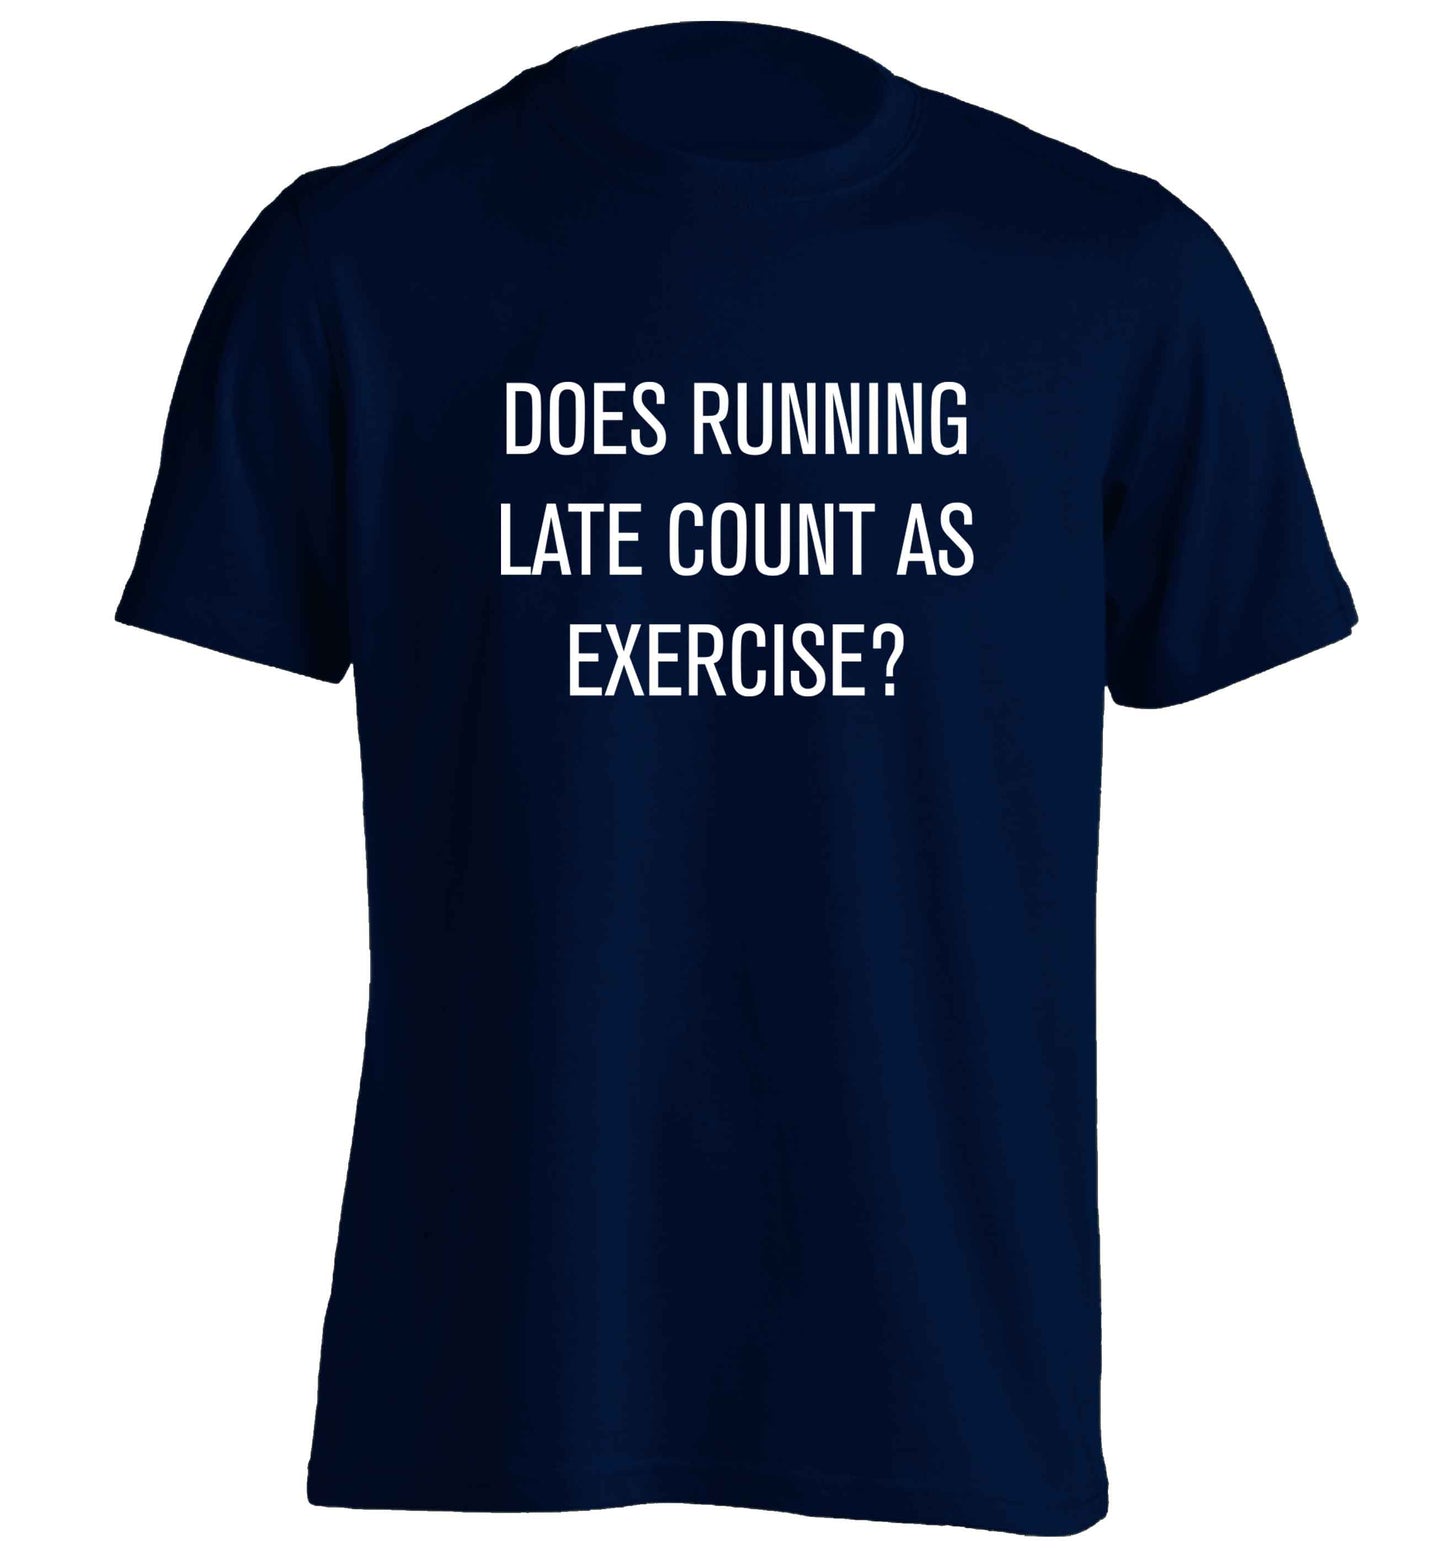 Does running late count as exercise? adults unisex navy Tshirt 2XL